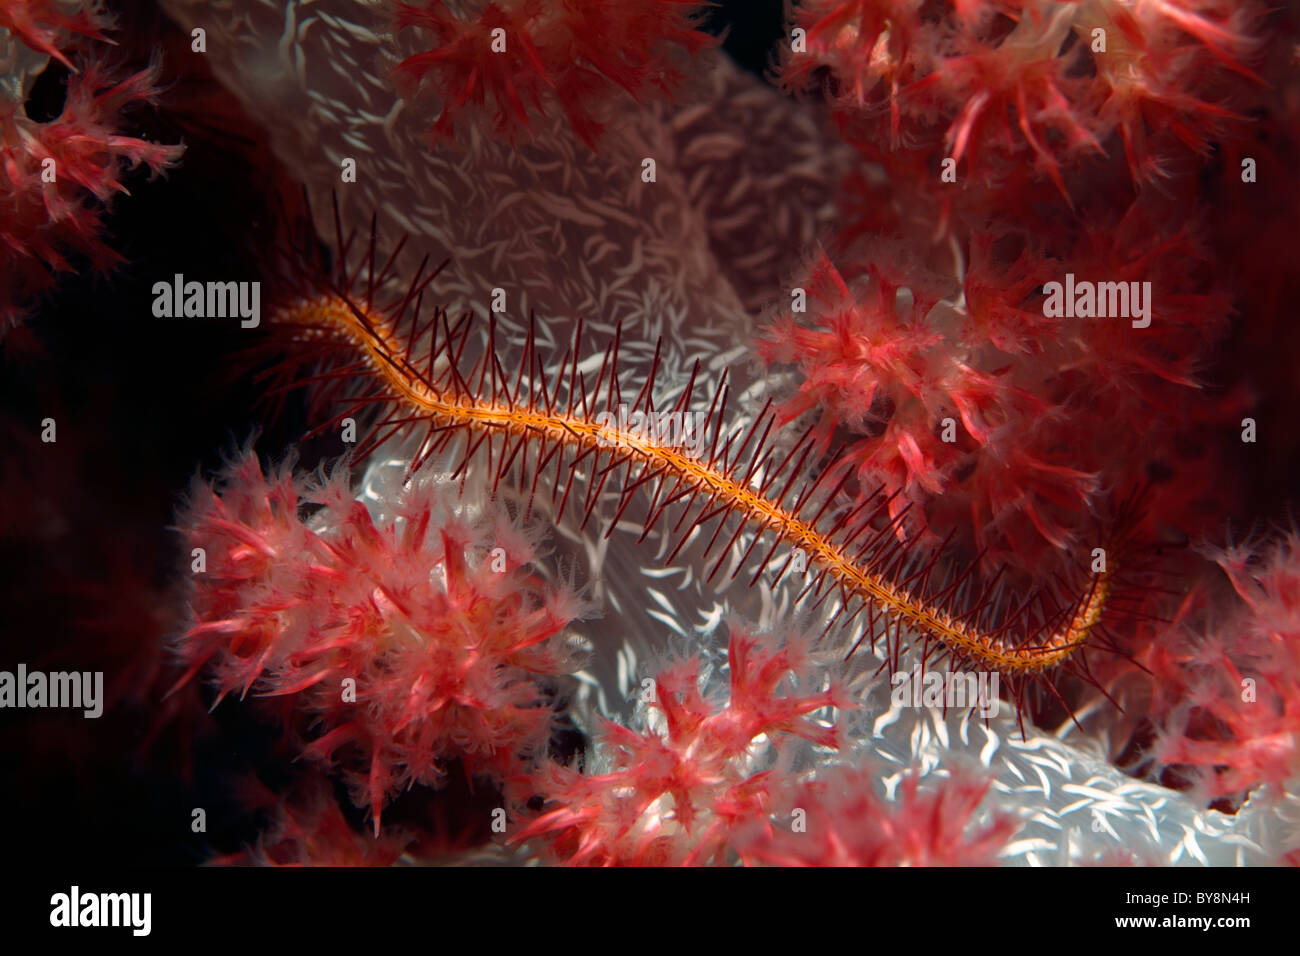 Long Arm Feather Star (Comissa) surrounded by Red spiky soft coral (Dendronephthya) in the Maldives Stock Photo